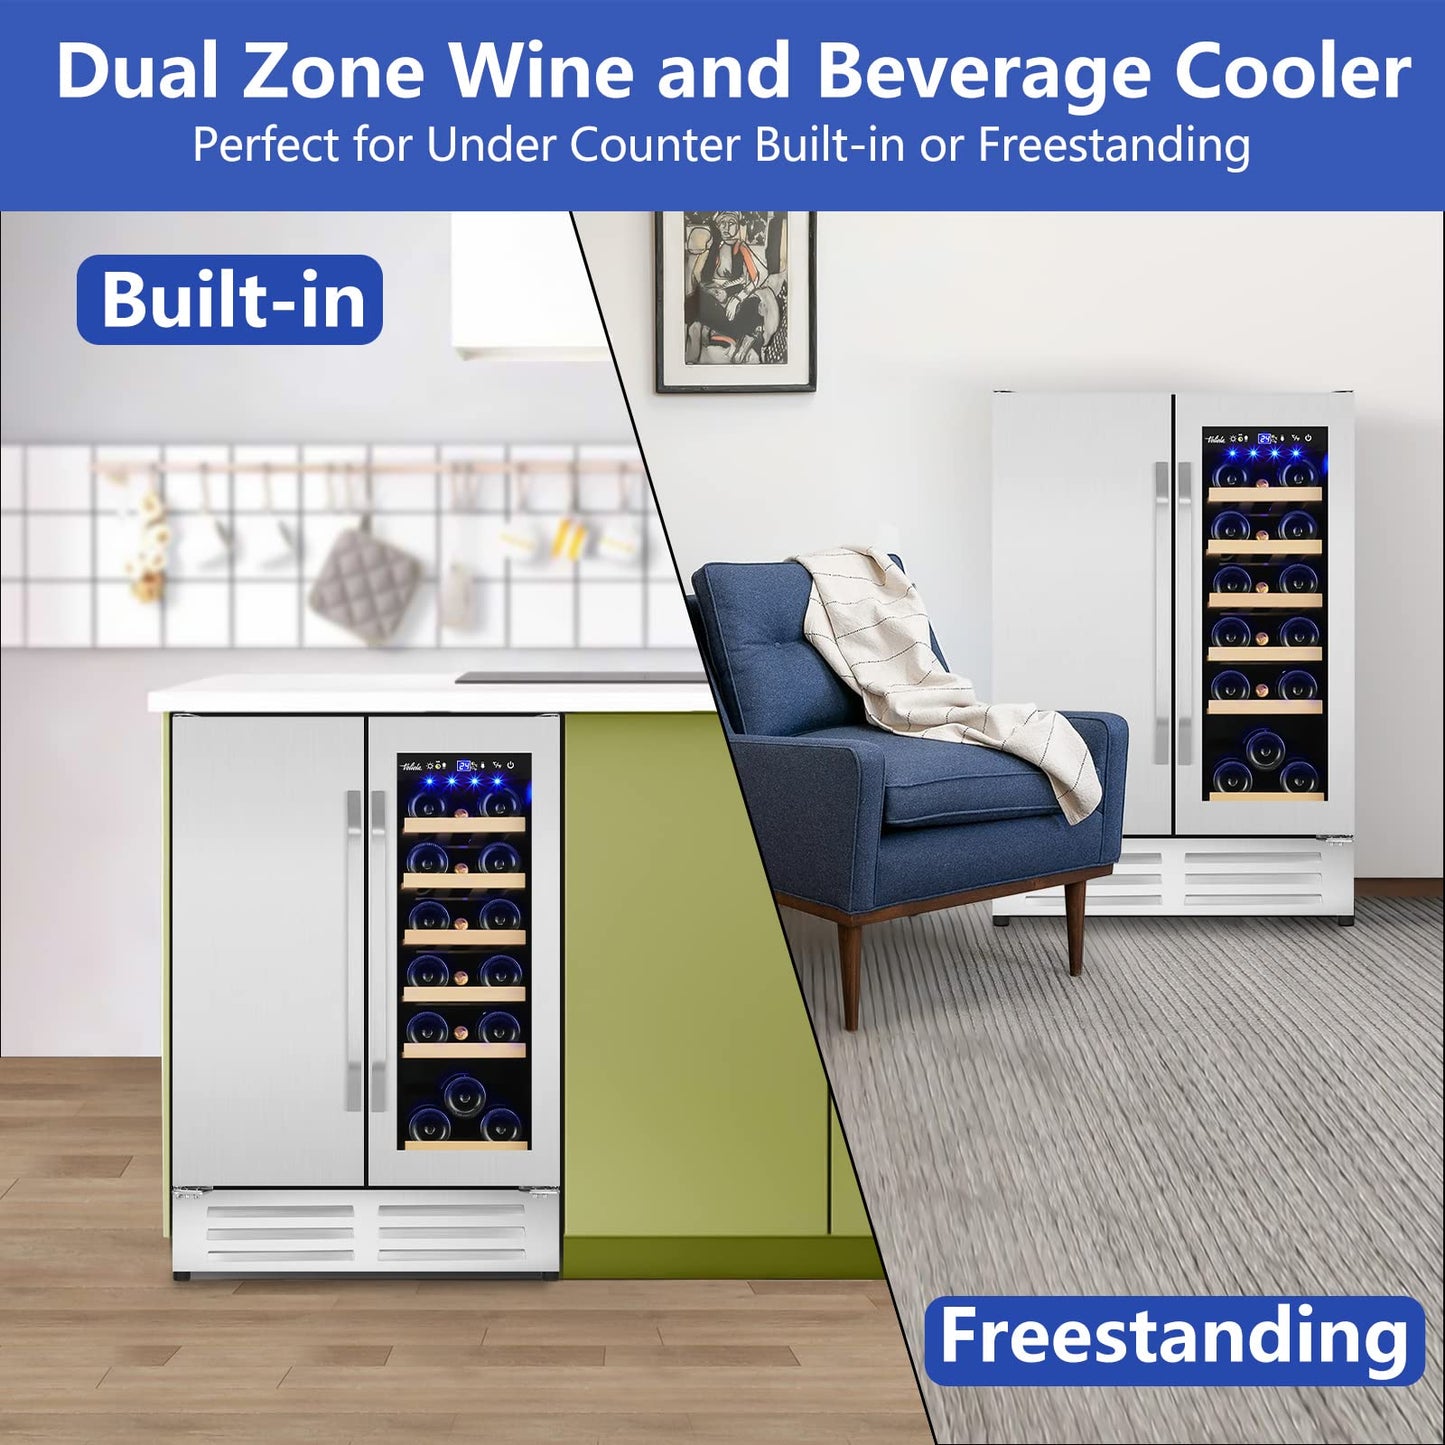 Velieta Outdoor Wine and Beverage Refrigerator,24 Inch Dual Zone Wine Beverage Cooler, Built-in/Freestanding Beer and Wine Fridge with a Powerful Compressor, 20 Bottles and 88 Cans Capacity